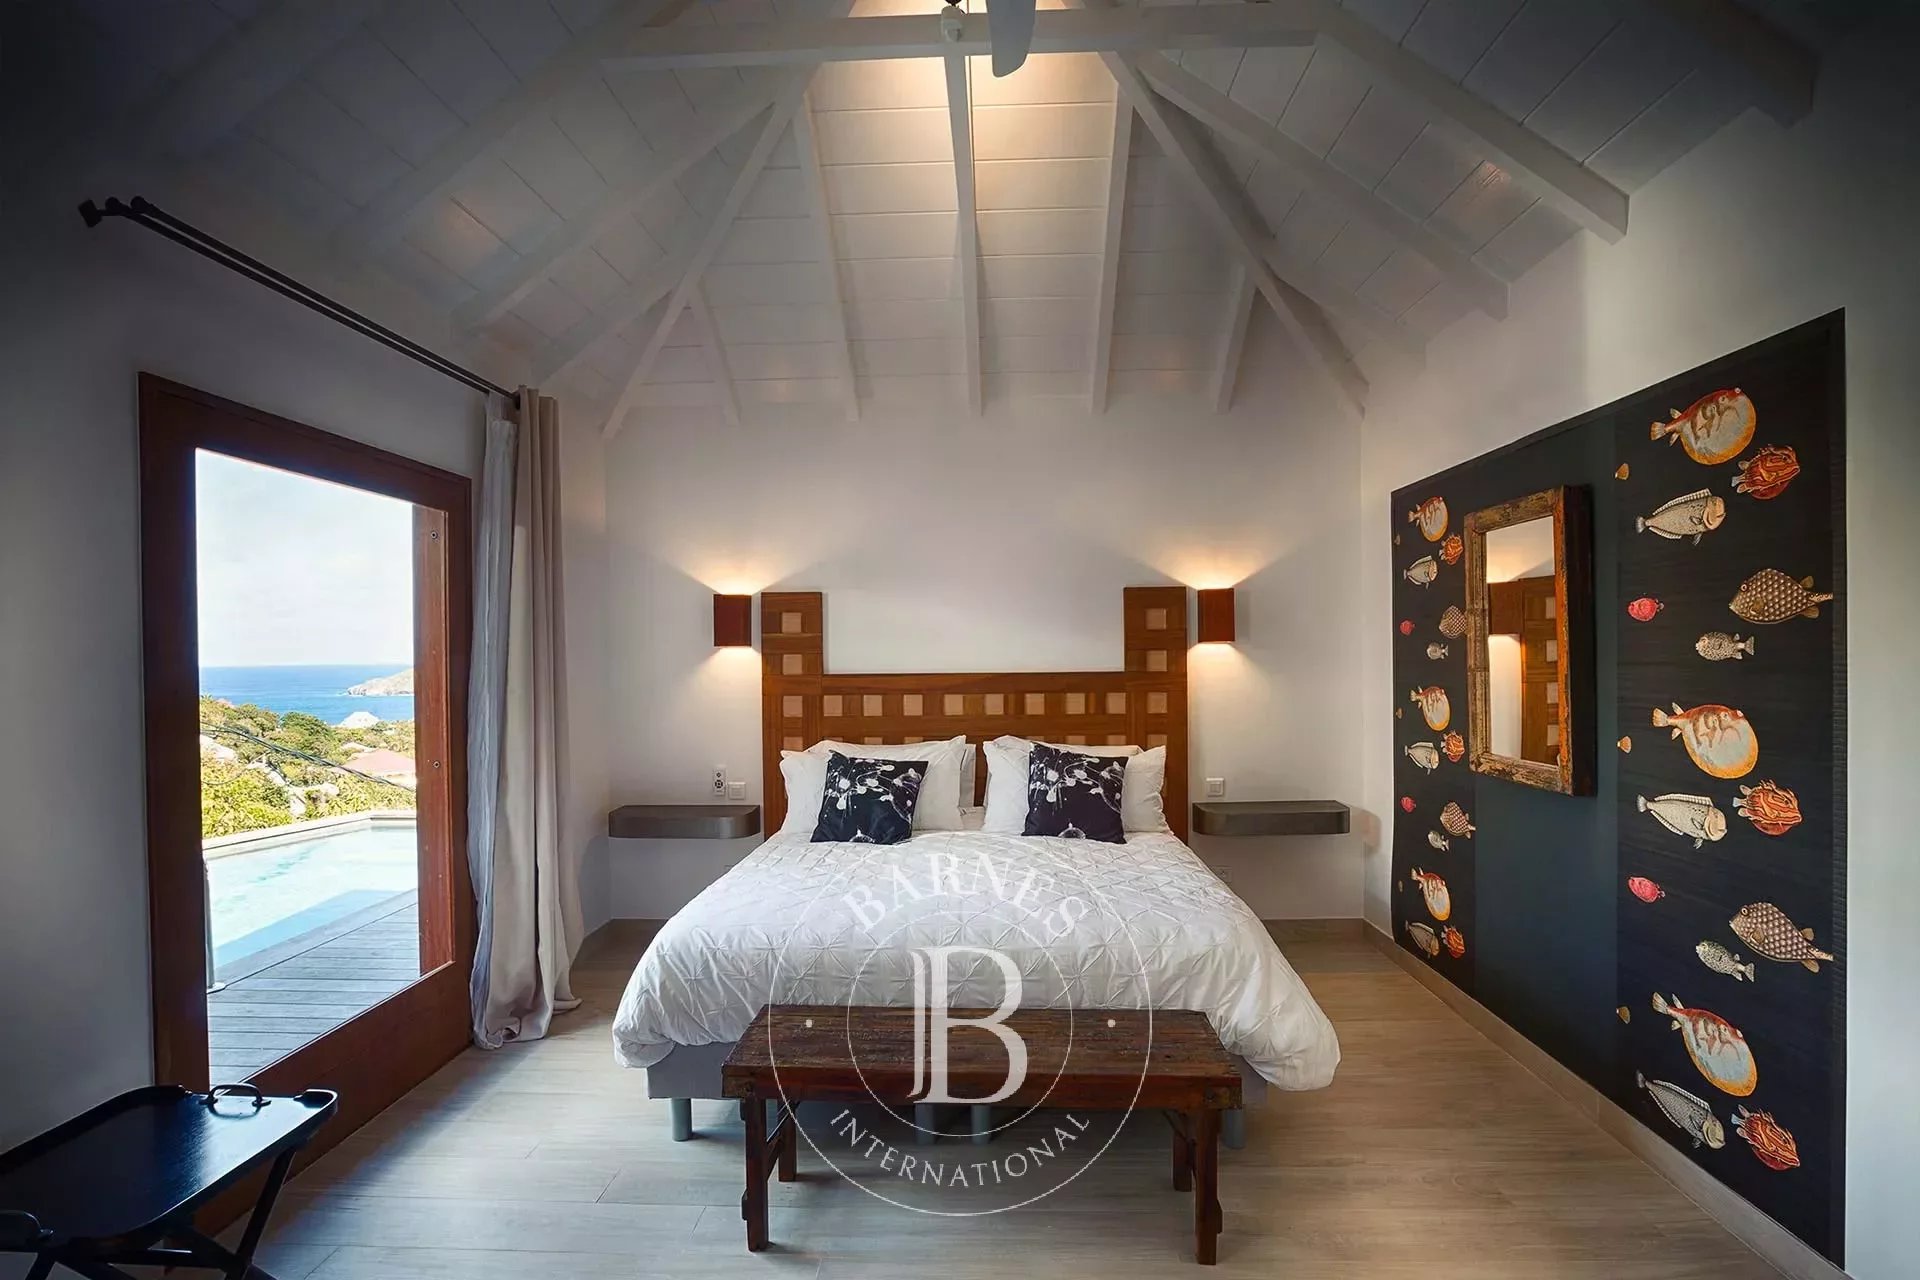 1-Bedroom Villa in St.Barths - picture 8 title=